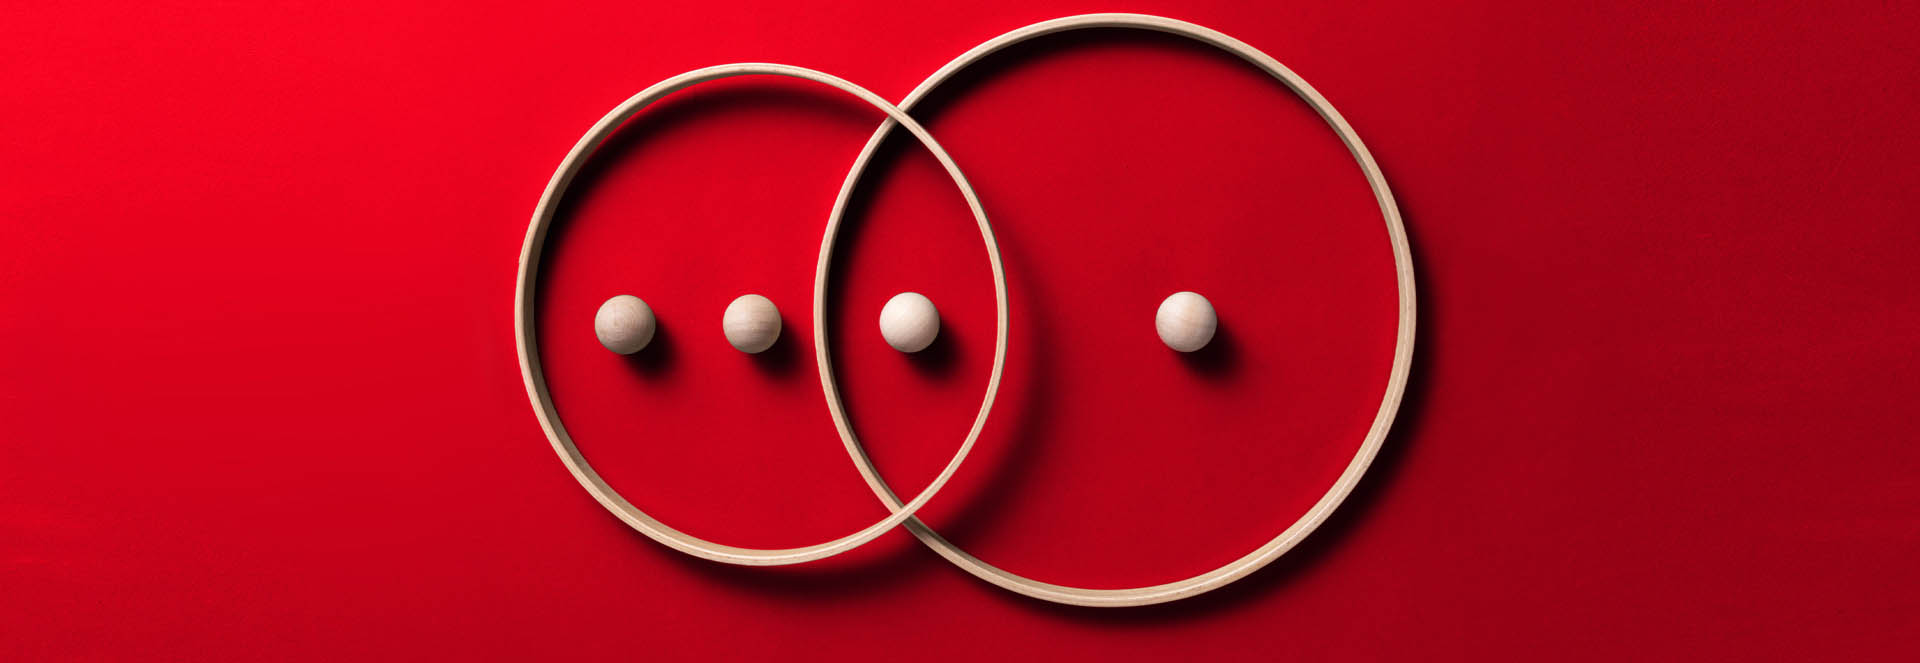 Photo depicting a Venn diagram made up of two overlapping circles with 5 dots between them: 3 dots in the left circle, 2 in the right, and one dot in the space where the 2 circles overlap.